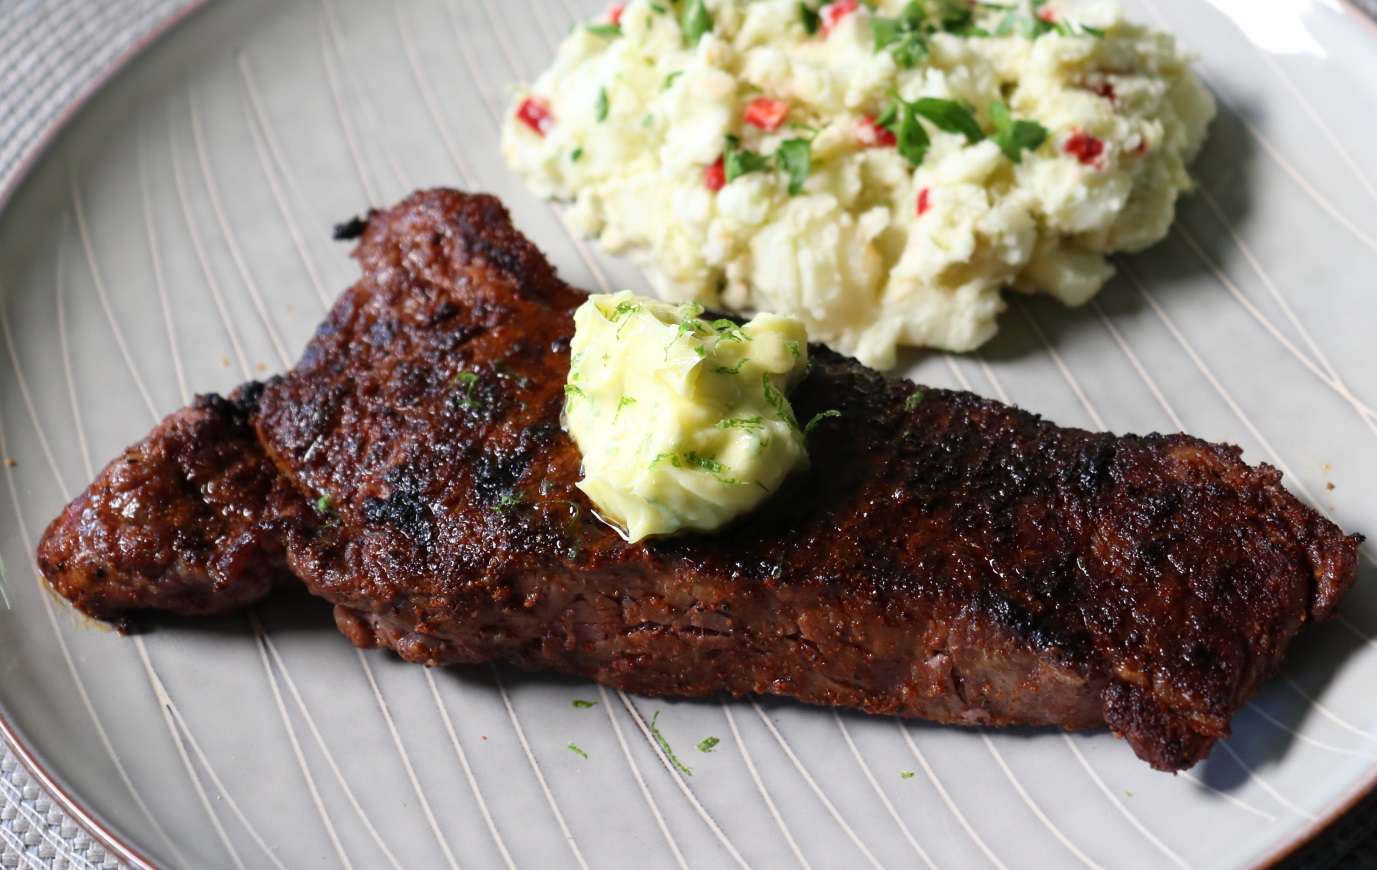 Grilled Chili Steak with Garlic-Lime Butter